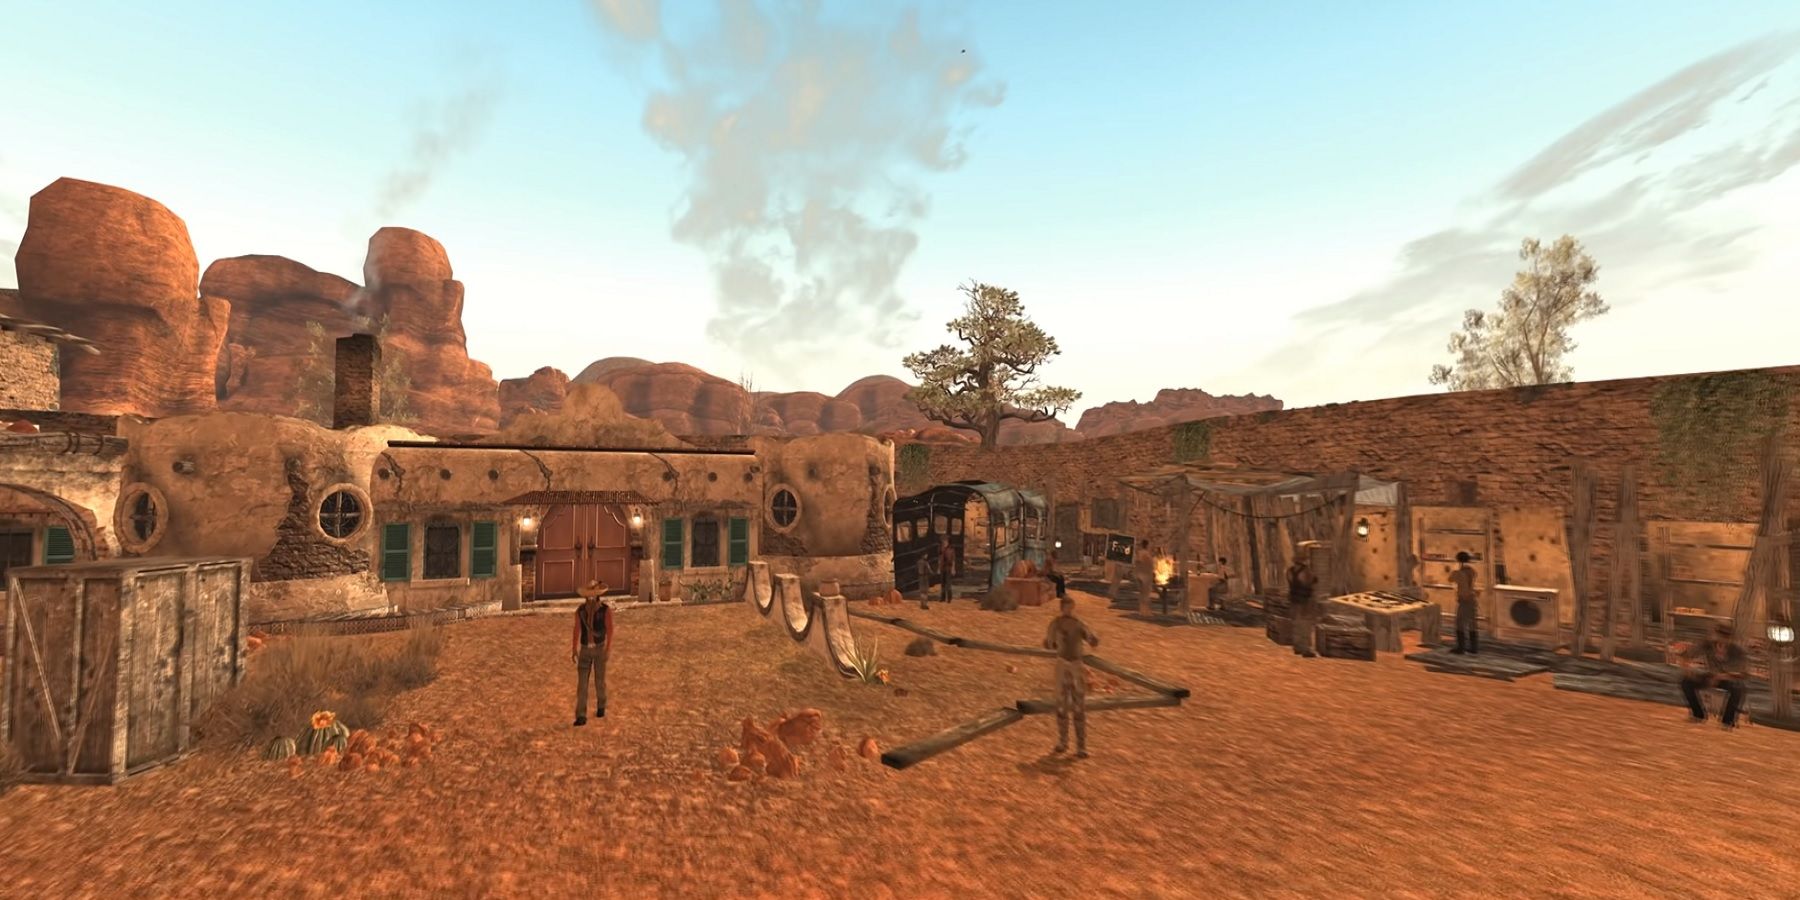 Screenshot from the Fallout: Nuevo Mexico mod that shows a small town in the desert.